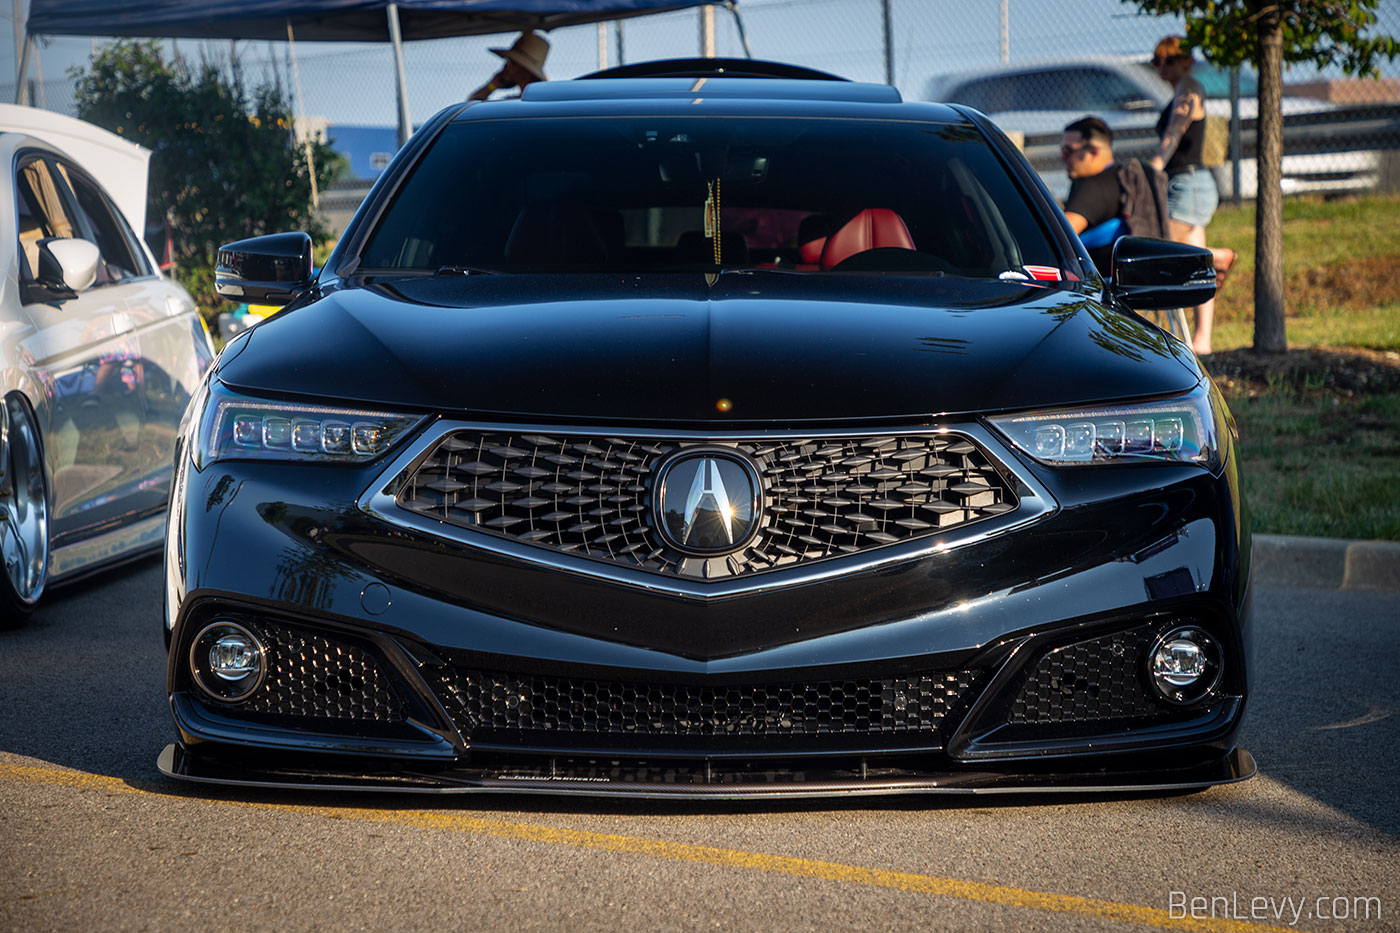 Front of Black Acura TLX